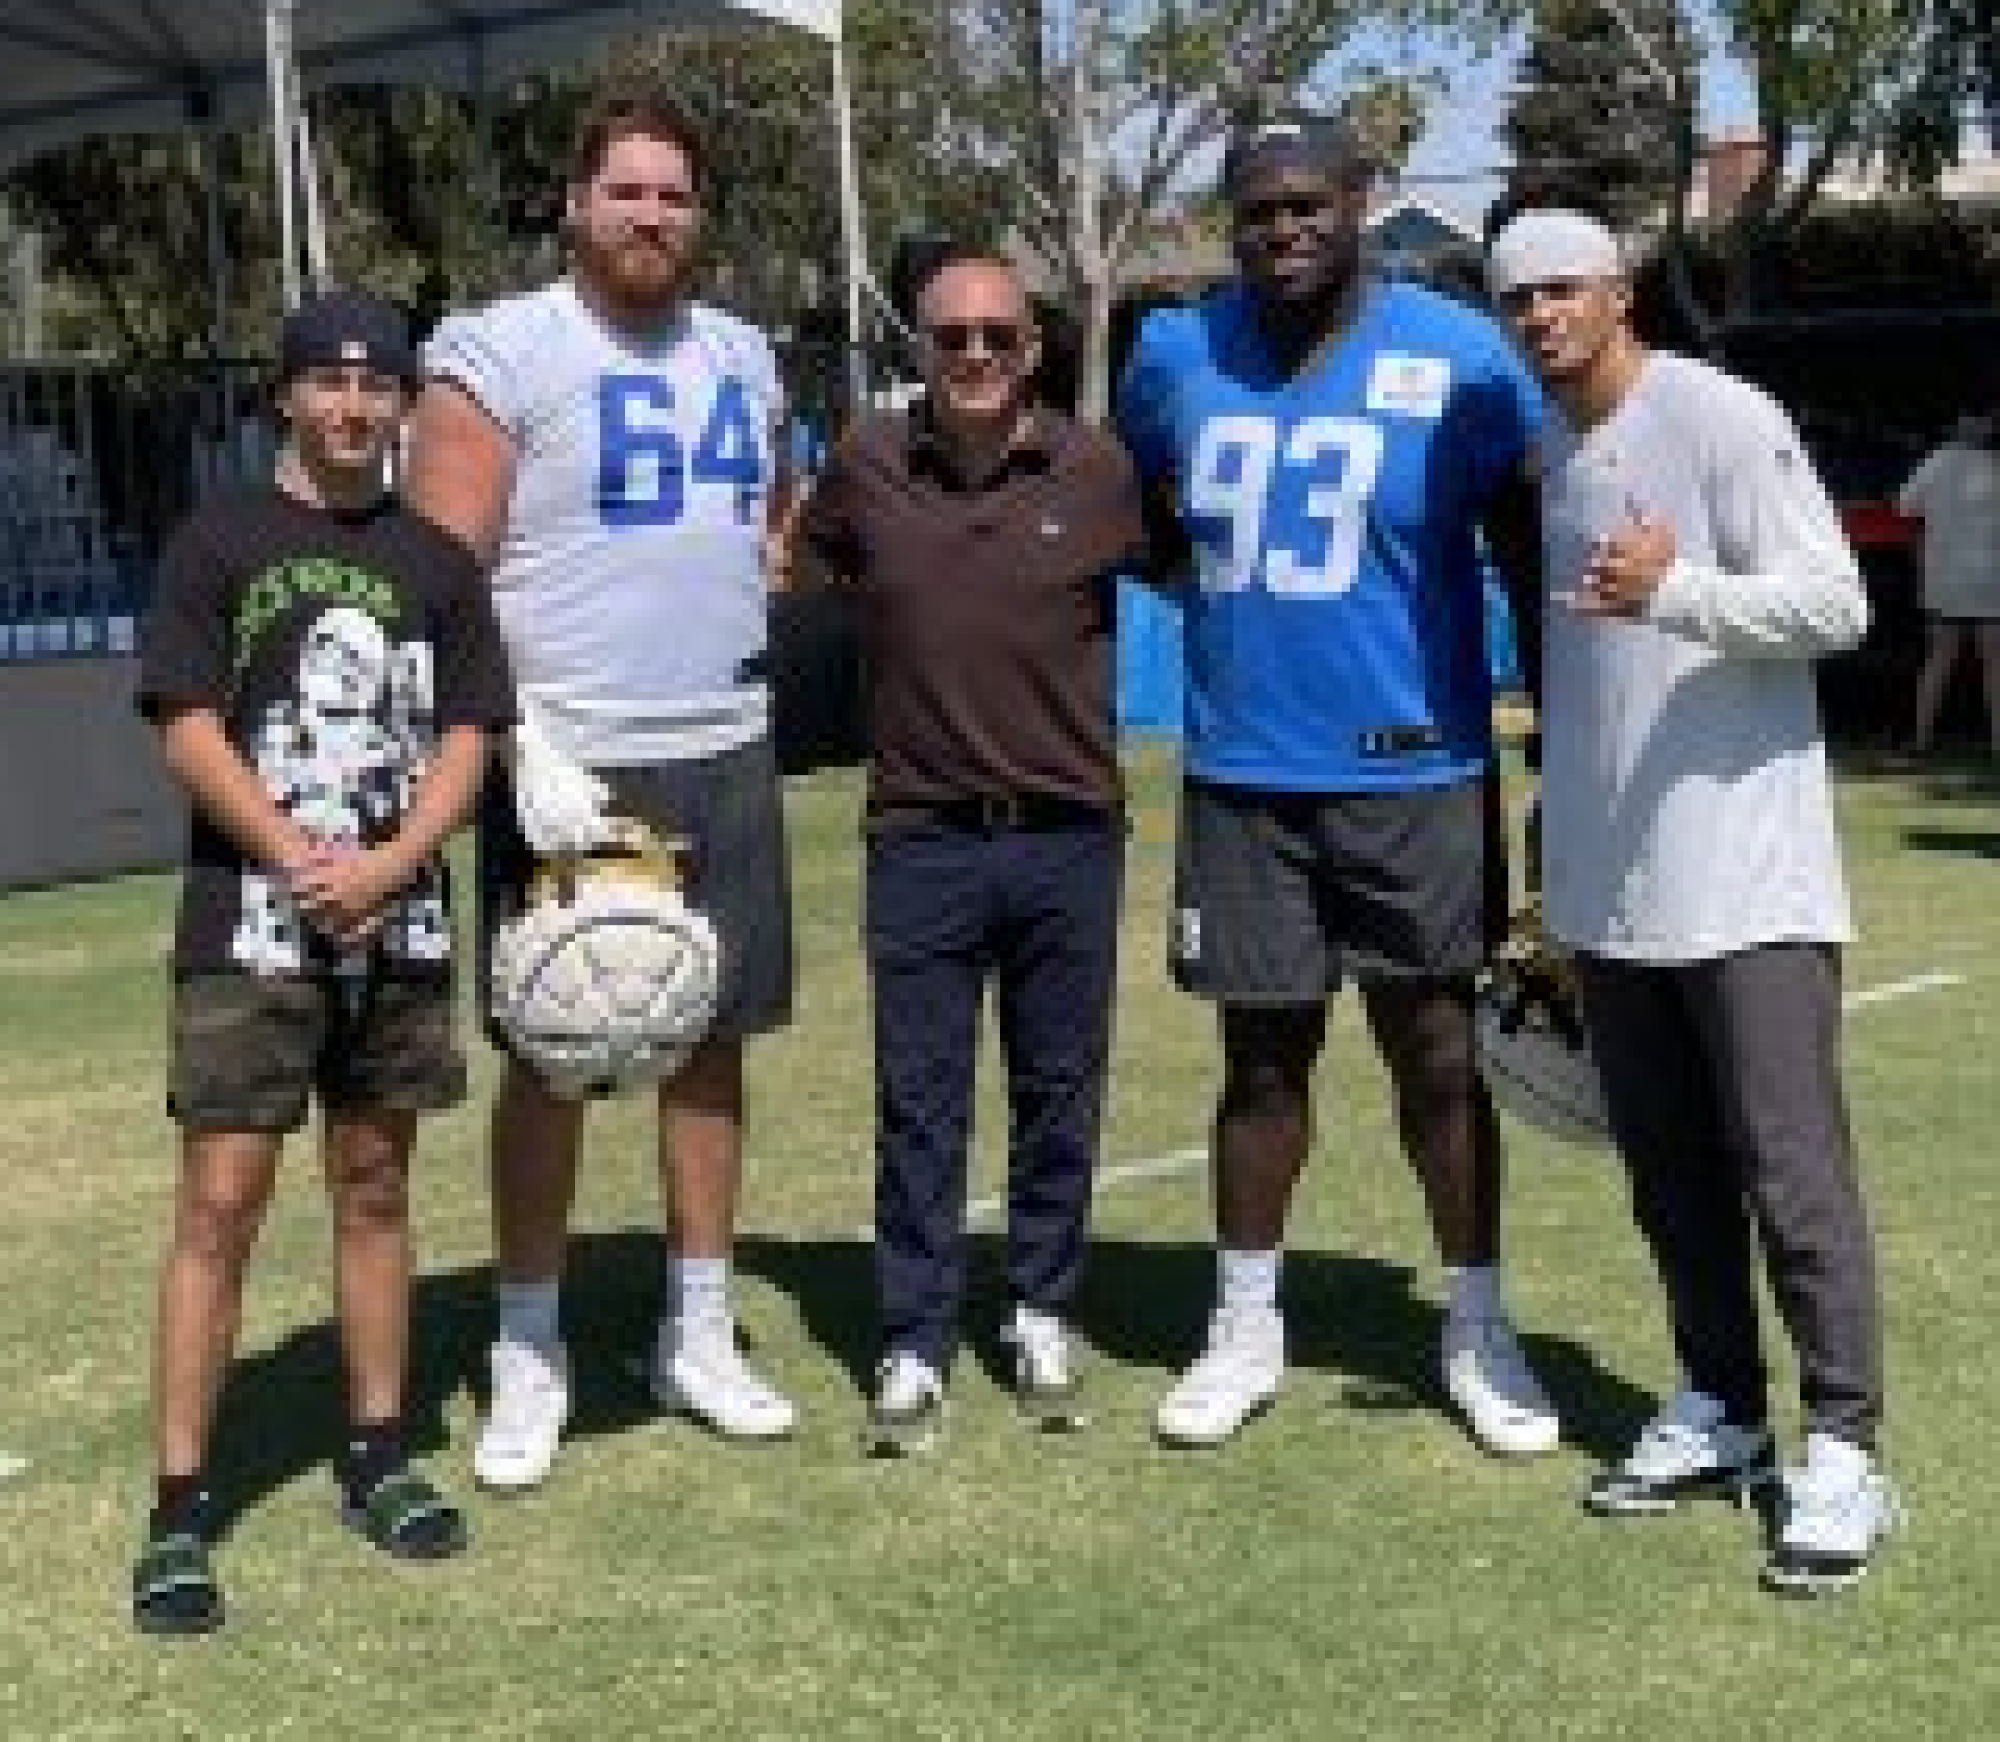 Priority Sports agent Kenny Zuckerman, center, stands with his son and three Chargers players.